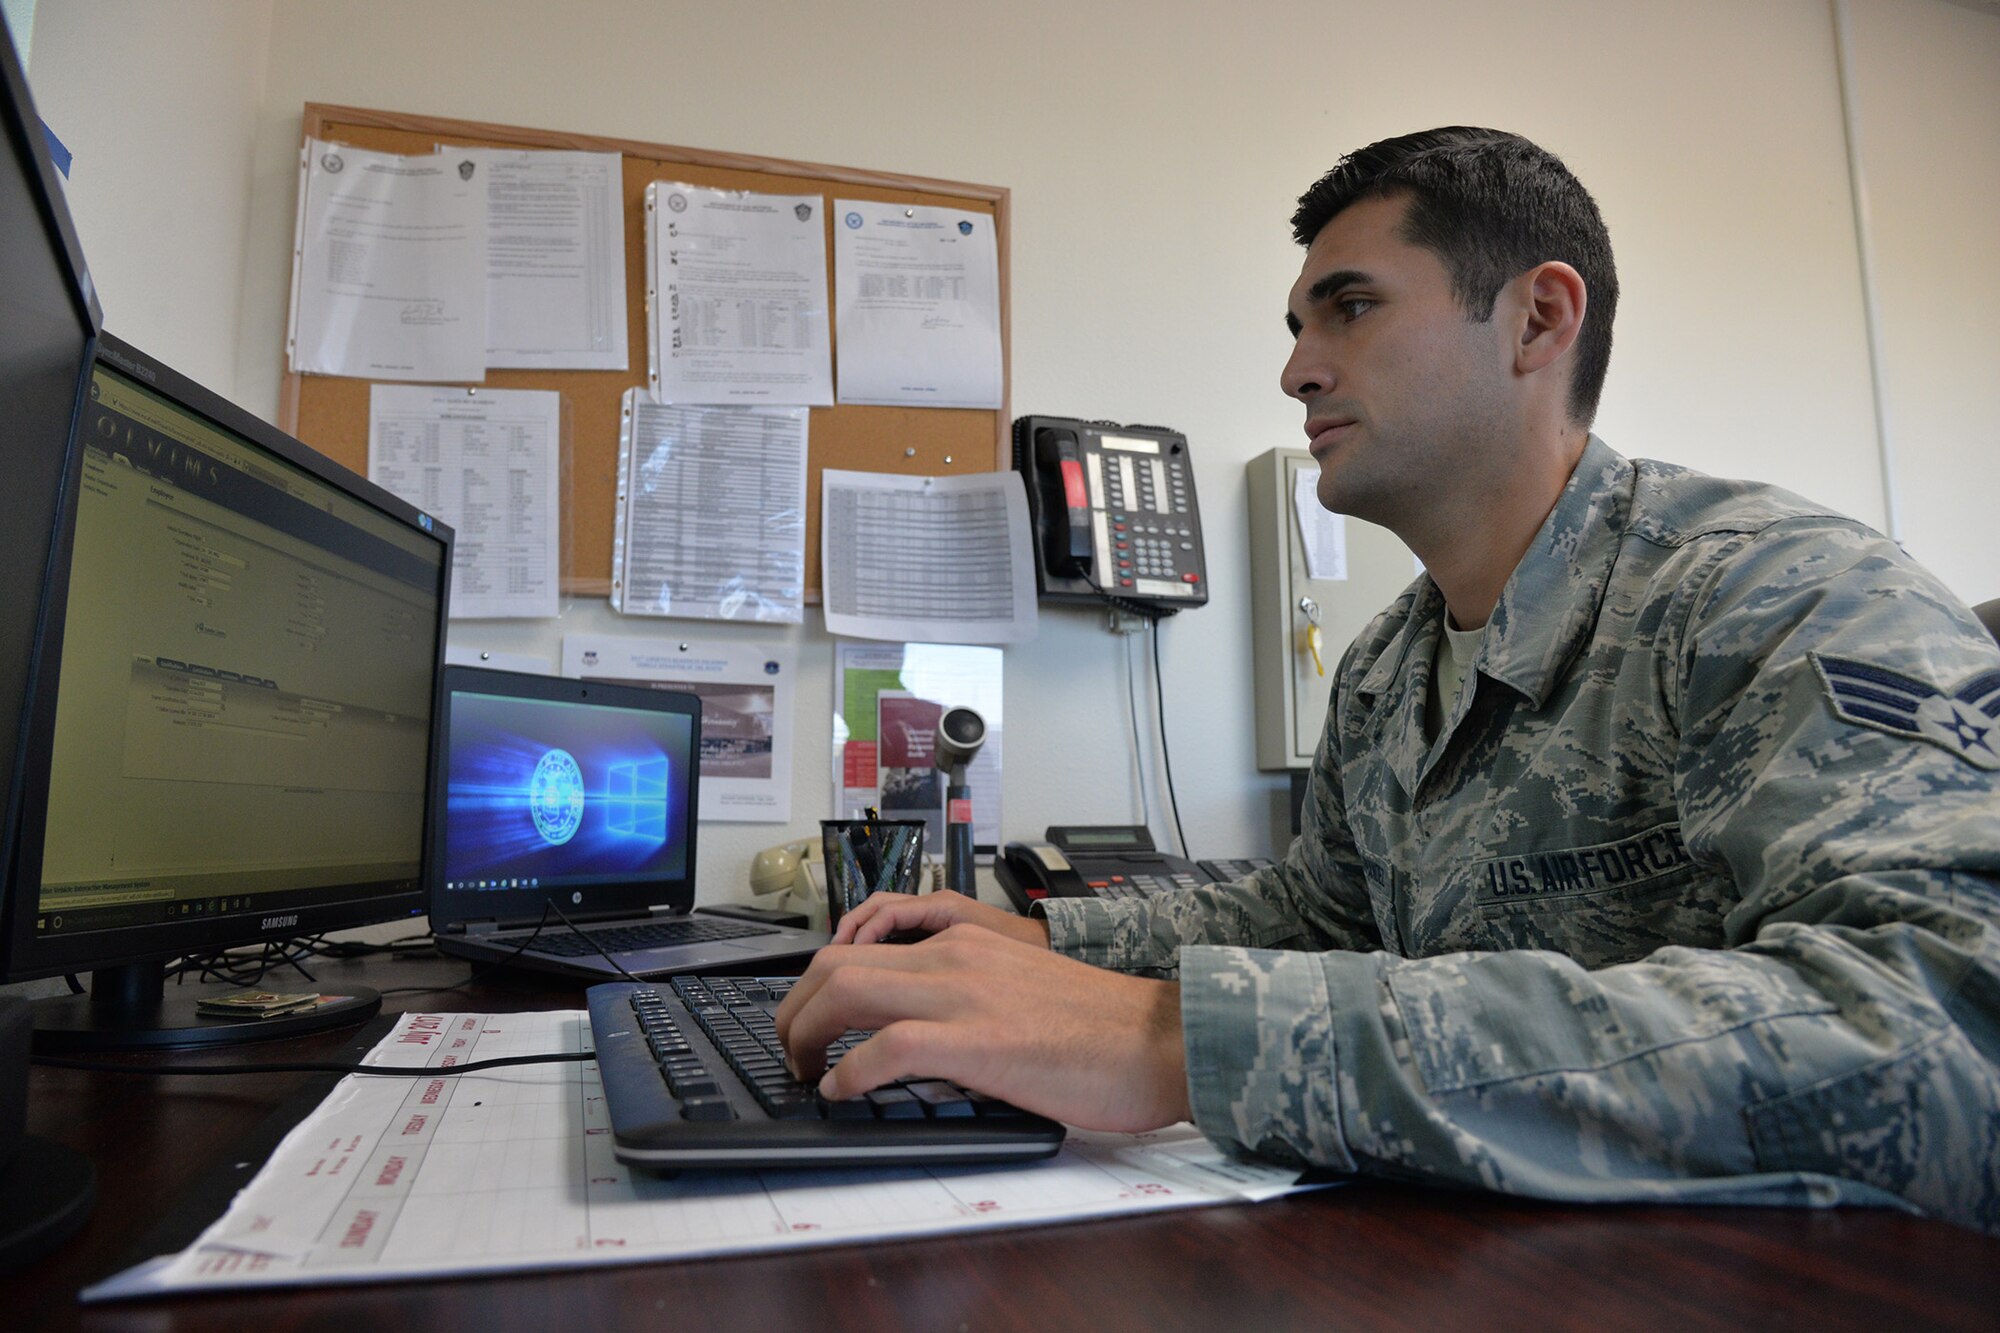 Senior Airman Felipe Vilches-Hernandez, 341st Logistics Readiness Squadron licensing and vehicle operator, uses the online vehicle management system July 19, 2017, at Malmstrom Air Force Base, Mont. The system is used to input personnel information and make military vehicle licenses for Airmen. (U.S. Air Force photo/Airman 1st Class Daniel Brosam)